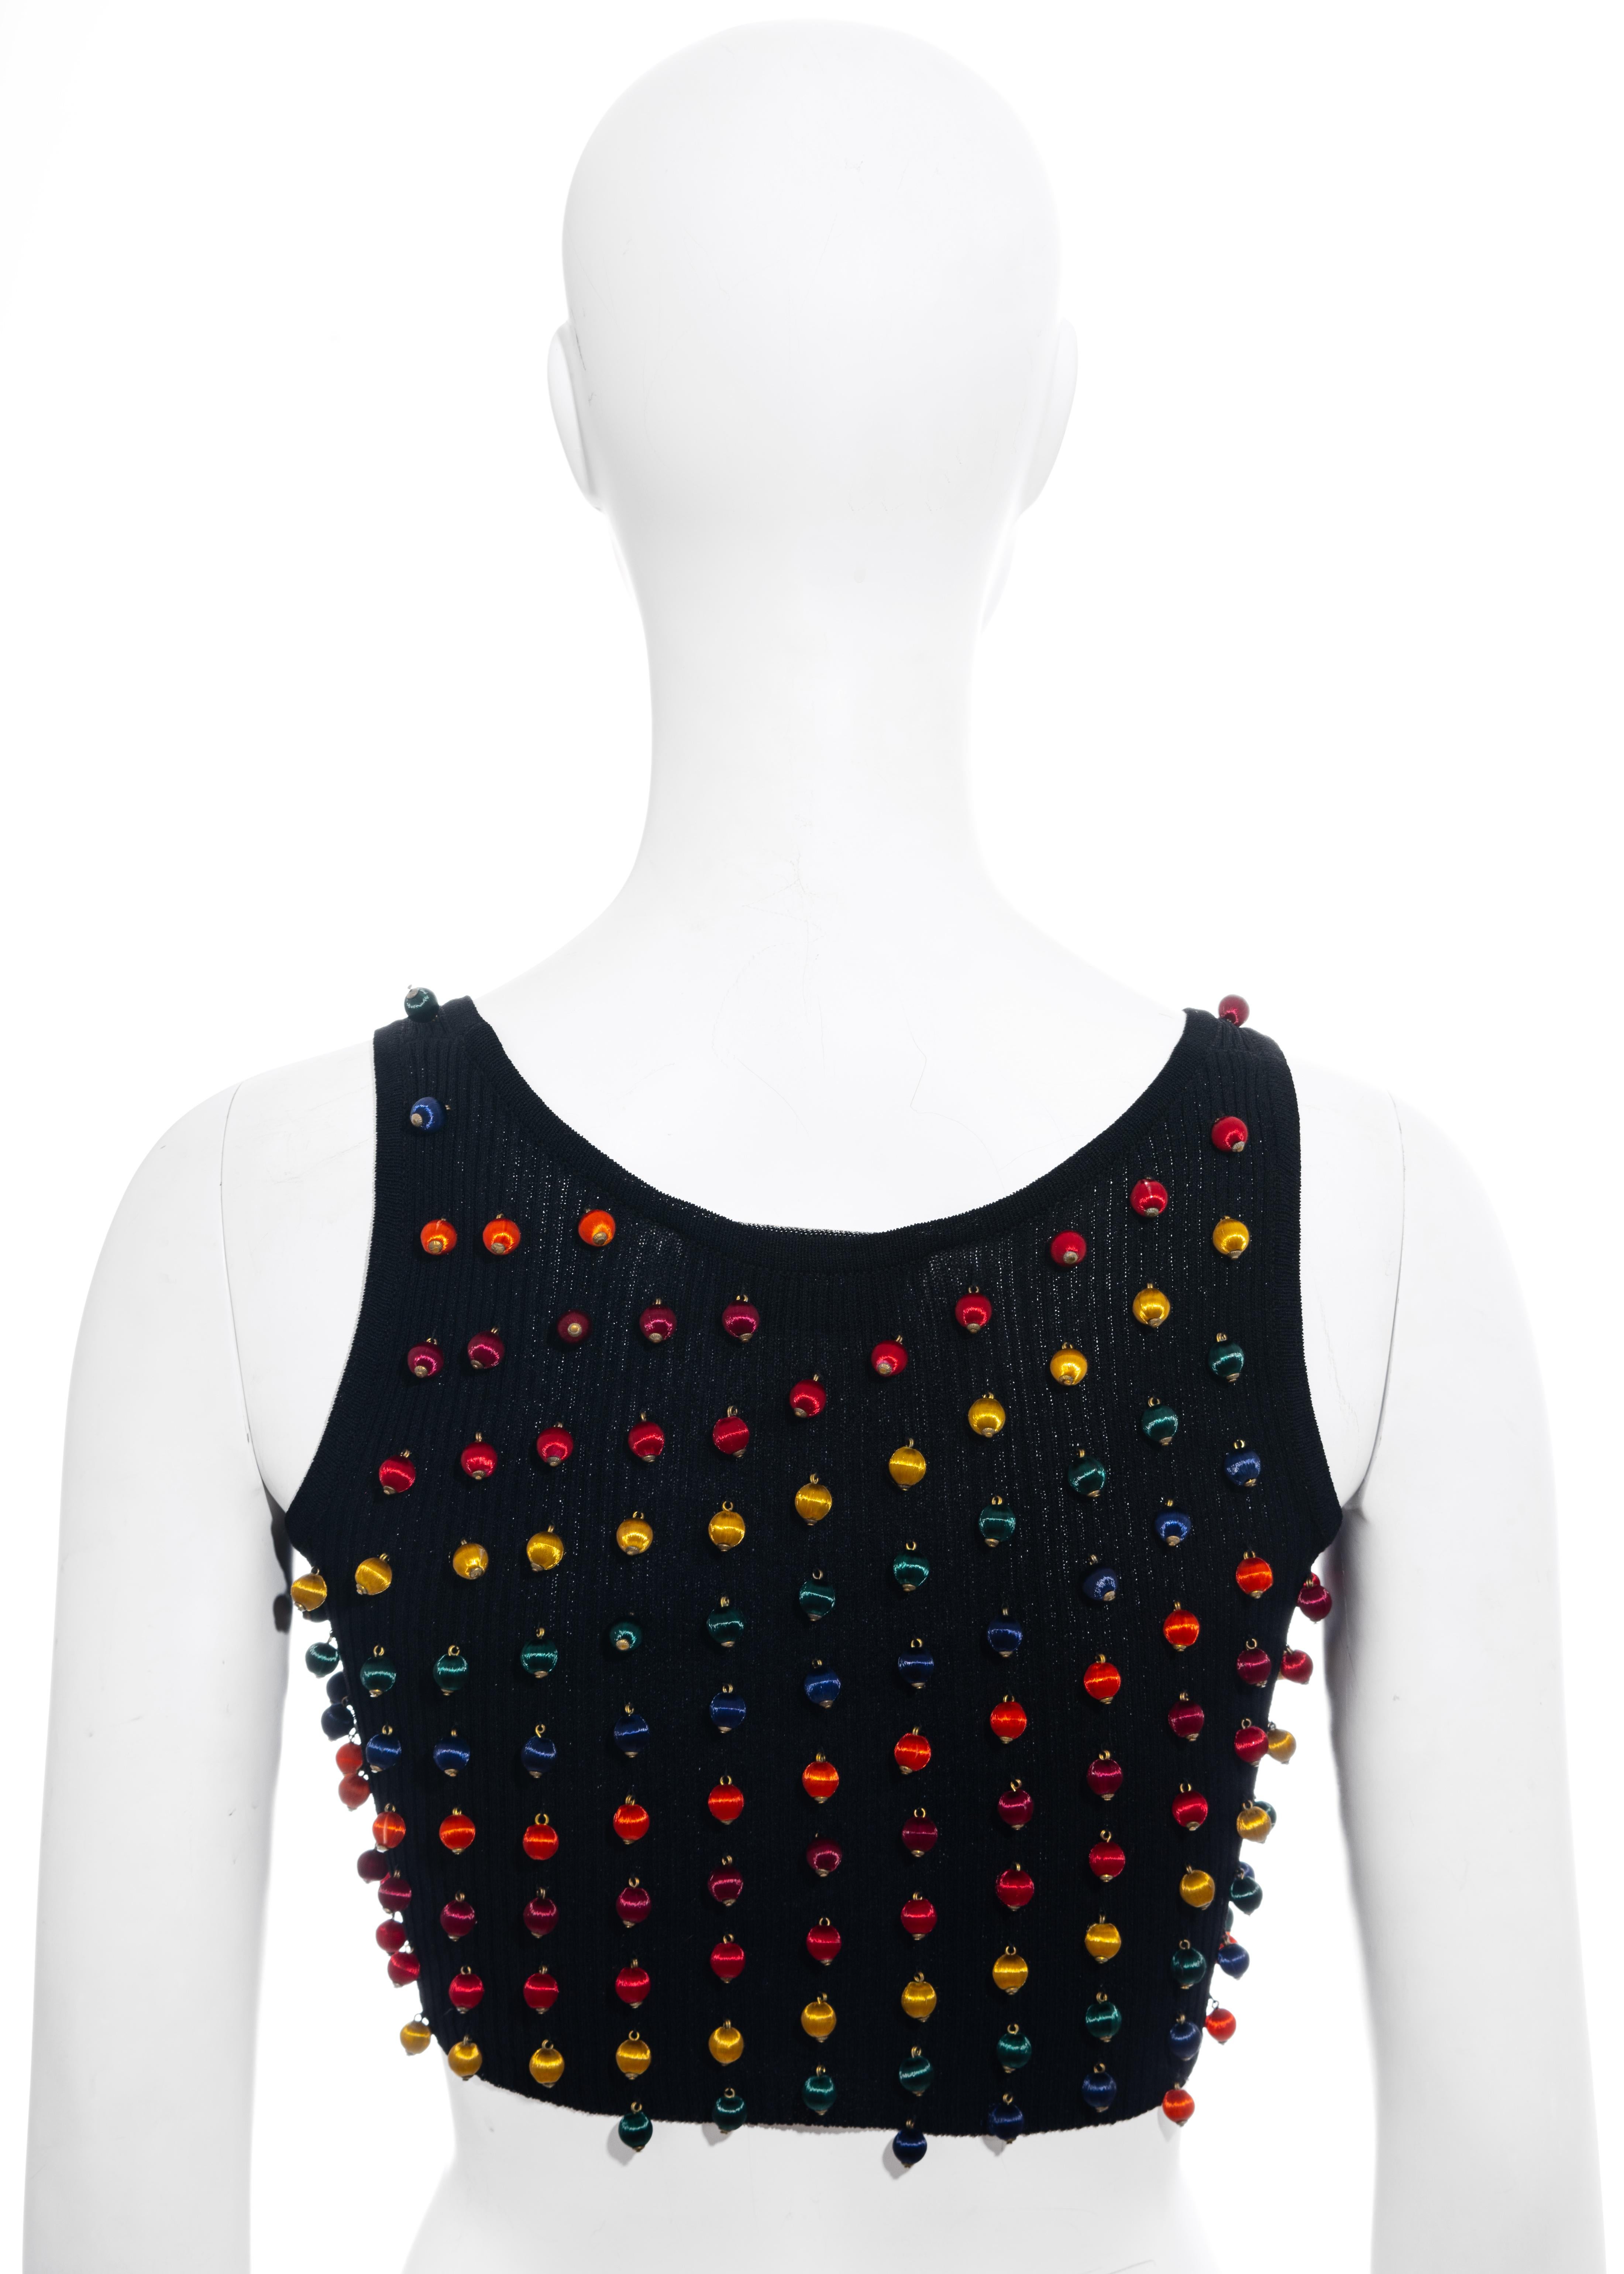 Women's Dolce & Gabbana black viscose cropped vest with colourful silk beads, ss 1992 For Sale